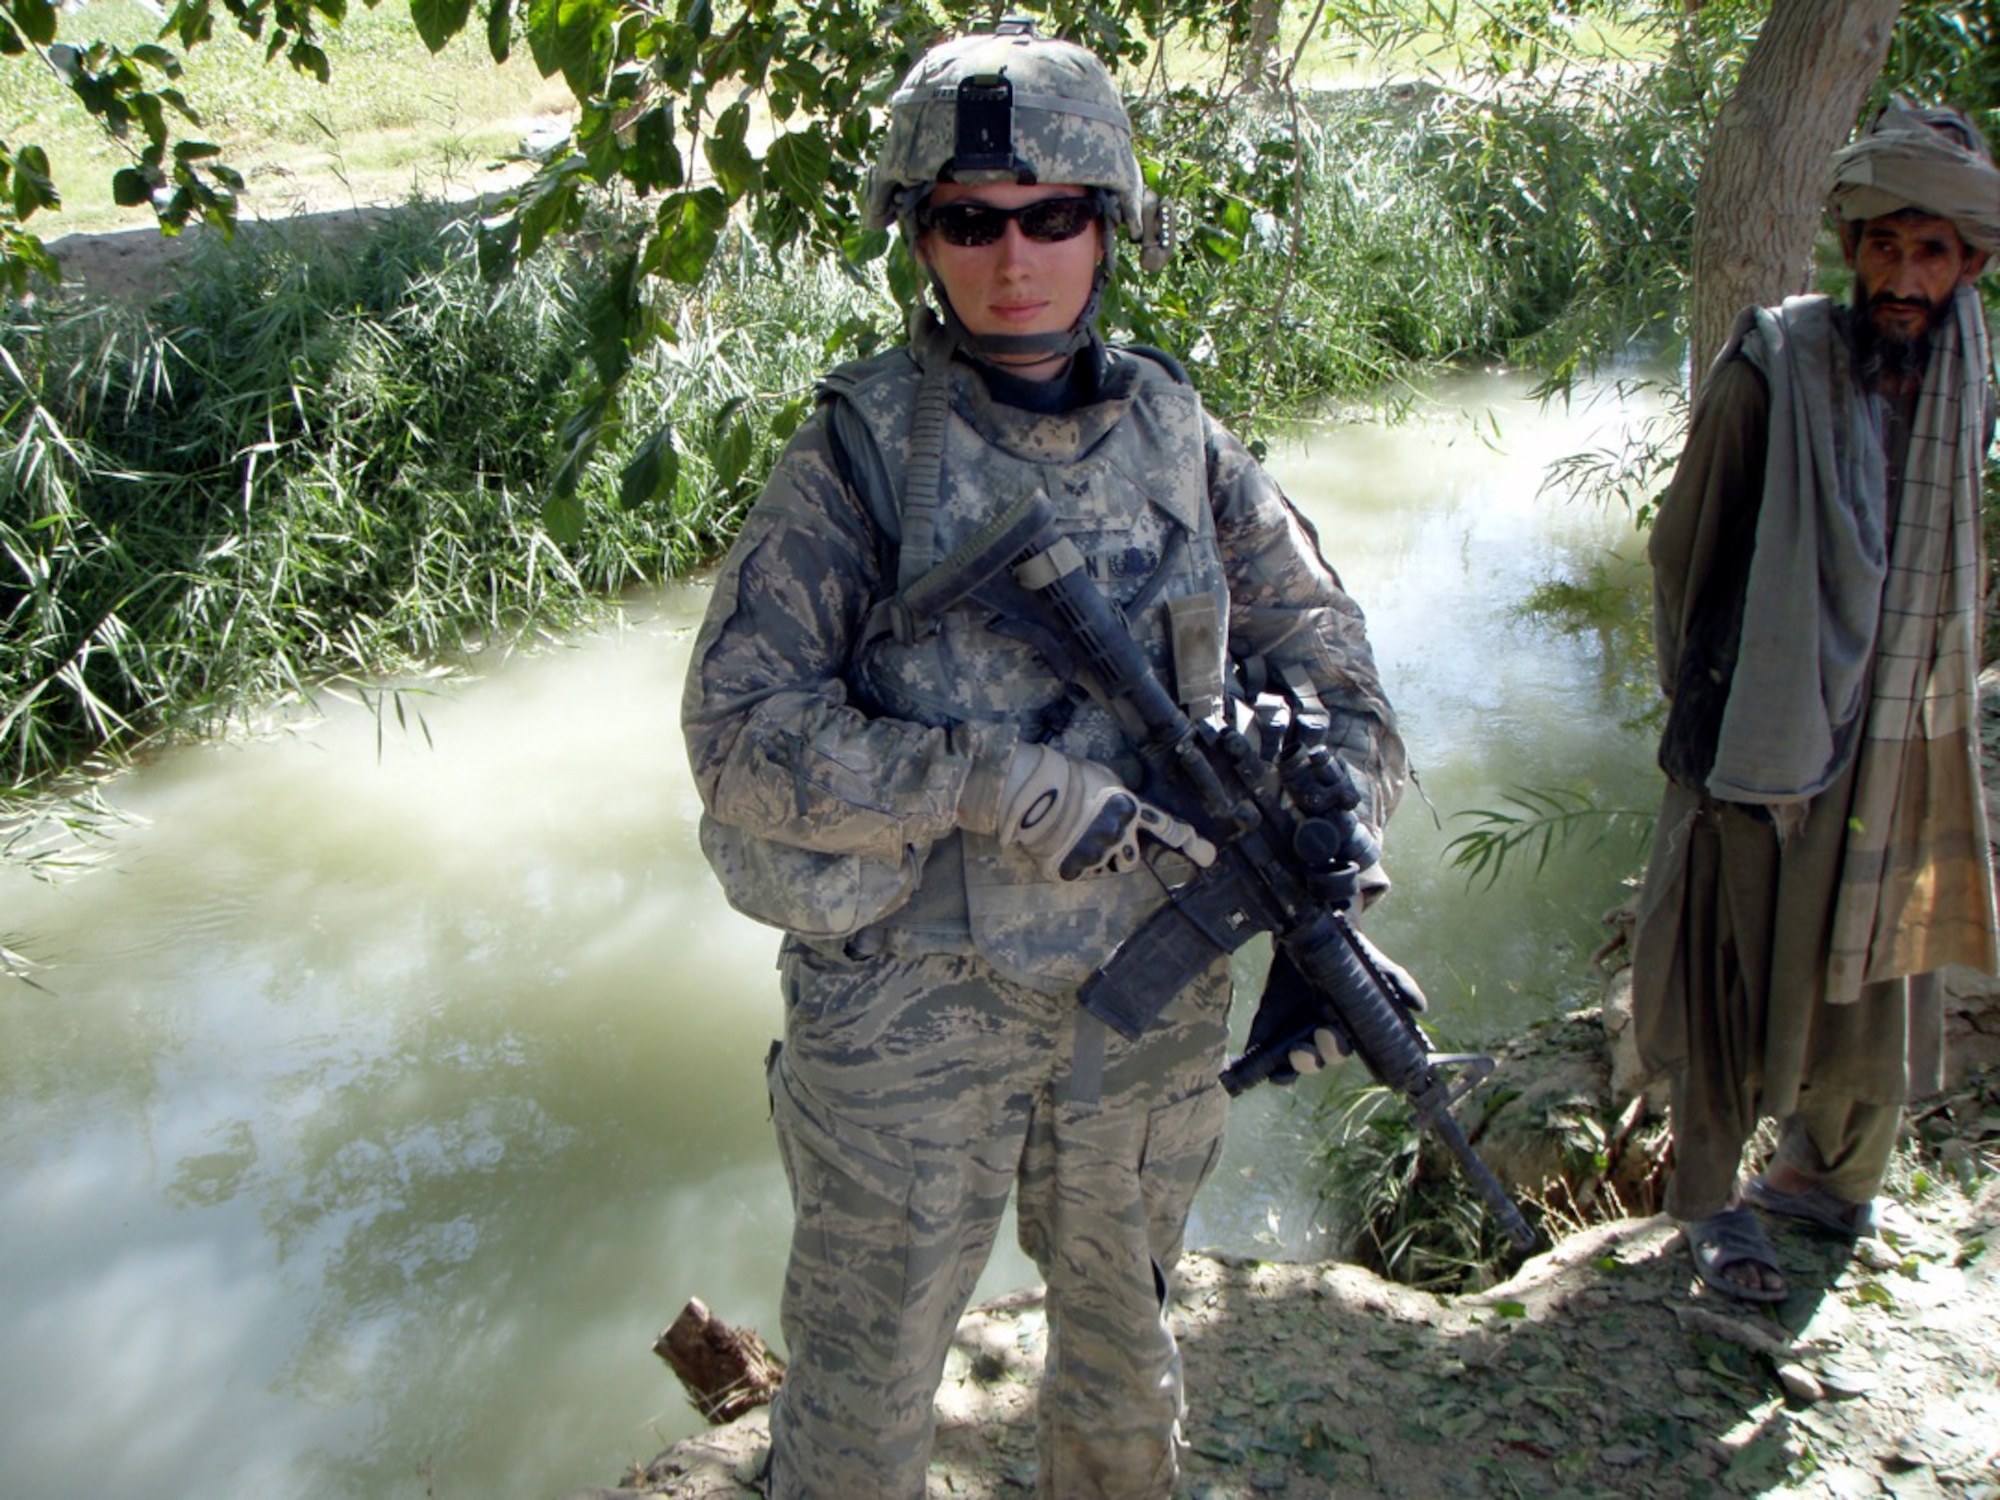 Senior Airman Marie Martinson patrols the area with an Afghan man while during deployment to Afghanistan.  Airman Martinson is an explosive ordnance disposal technician at the 88th Air Base Wing at Wright-Patterson Air Force Base, Ohio. (U.S. Air Force photo)  